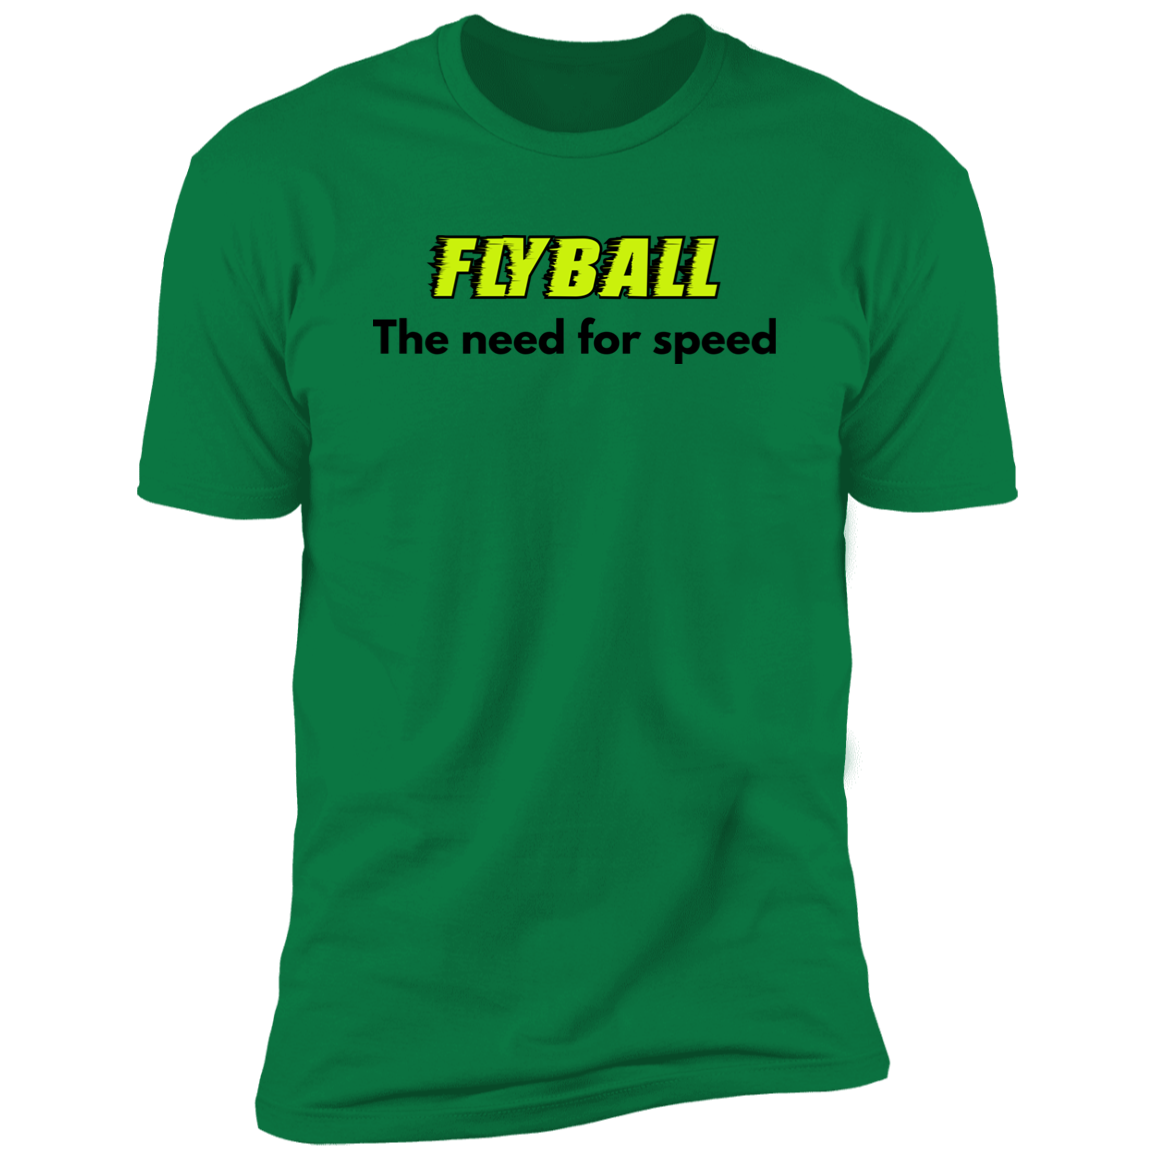 Flyball The Need For Speed dog shirt, dog shirt for humans, sporting dog shirt, in kelly green